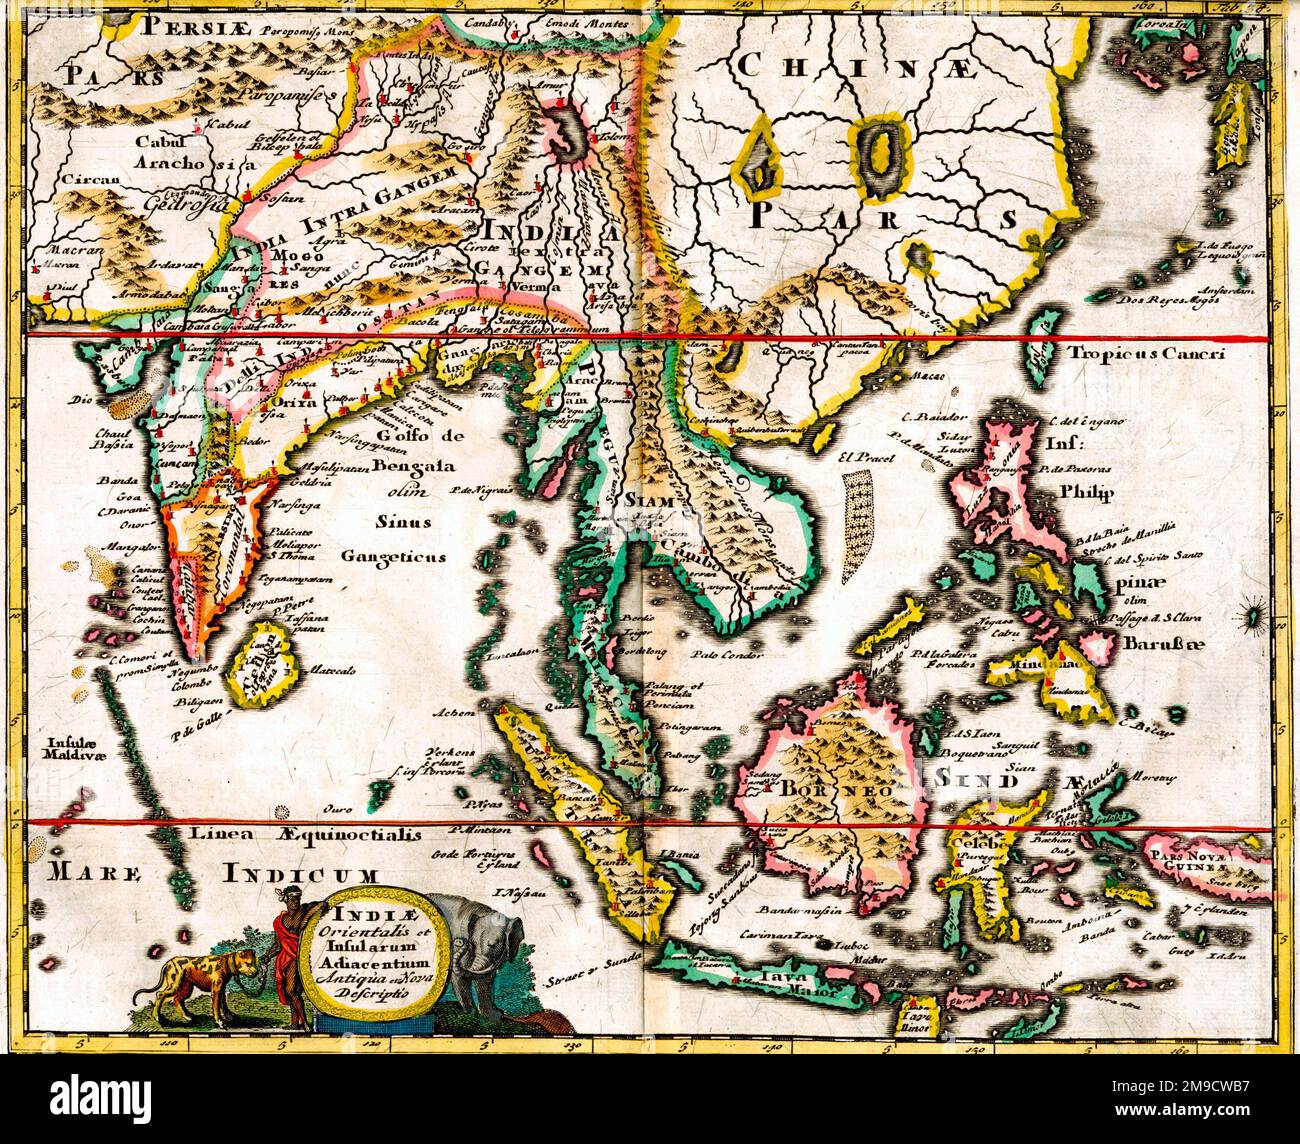 18th century Map of South East Asia and East Indies, Indiae Orientalis Stock Photo